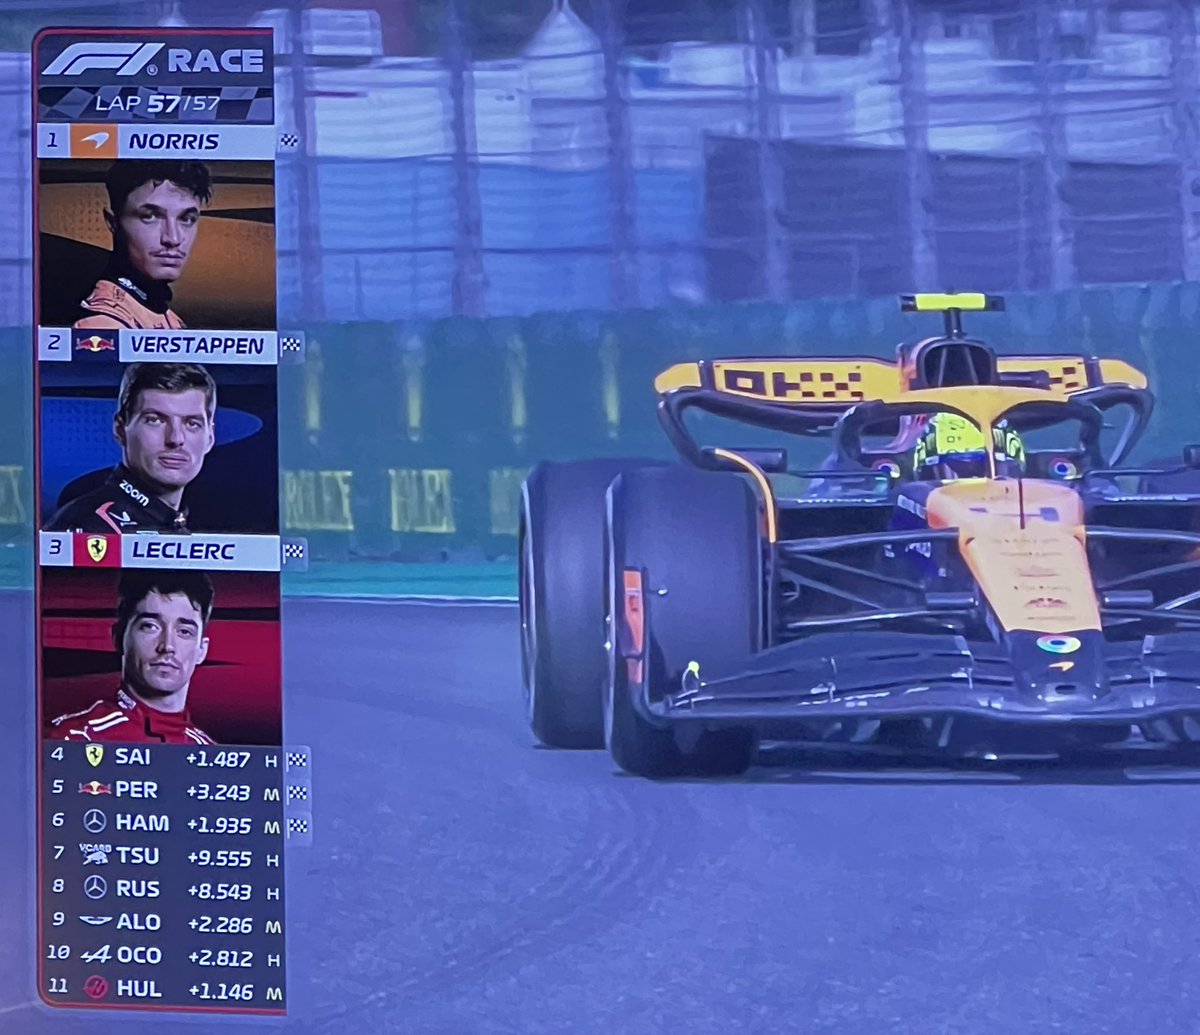 Witnessing History 🧡 I am so so happy that he won! He did a fantastic race, I’m so so happy for him 🥹🧡